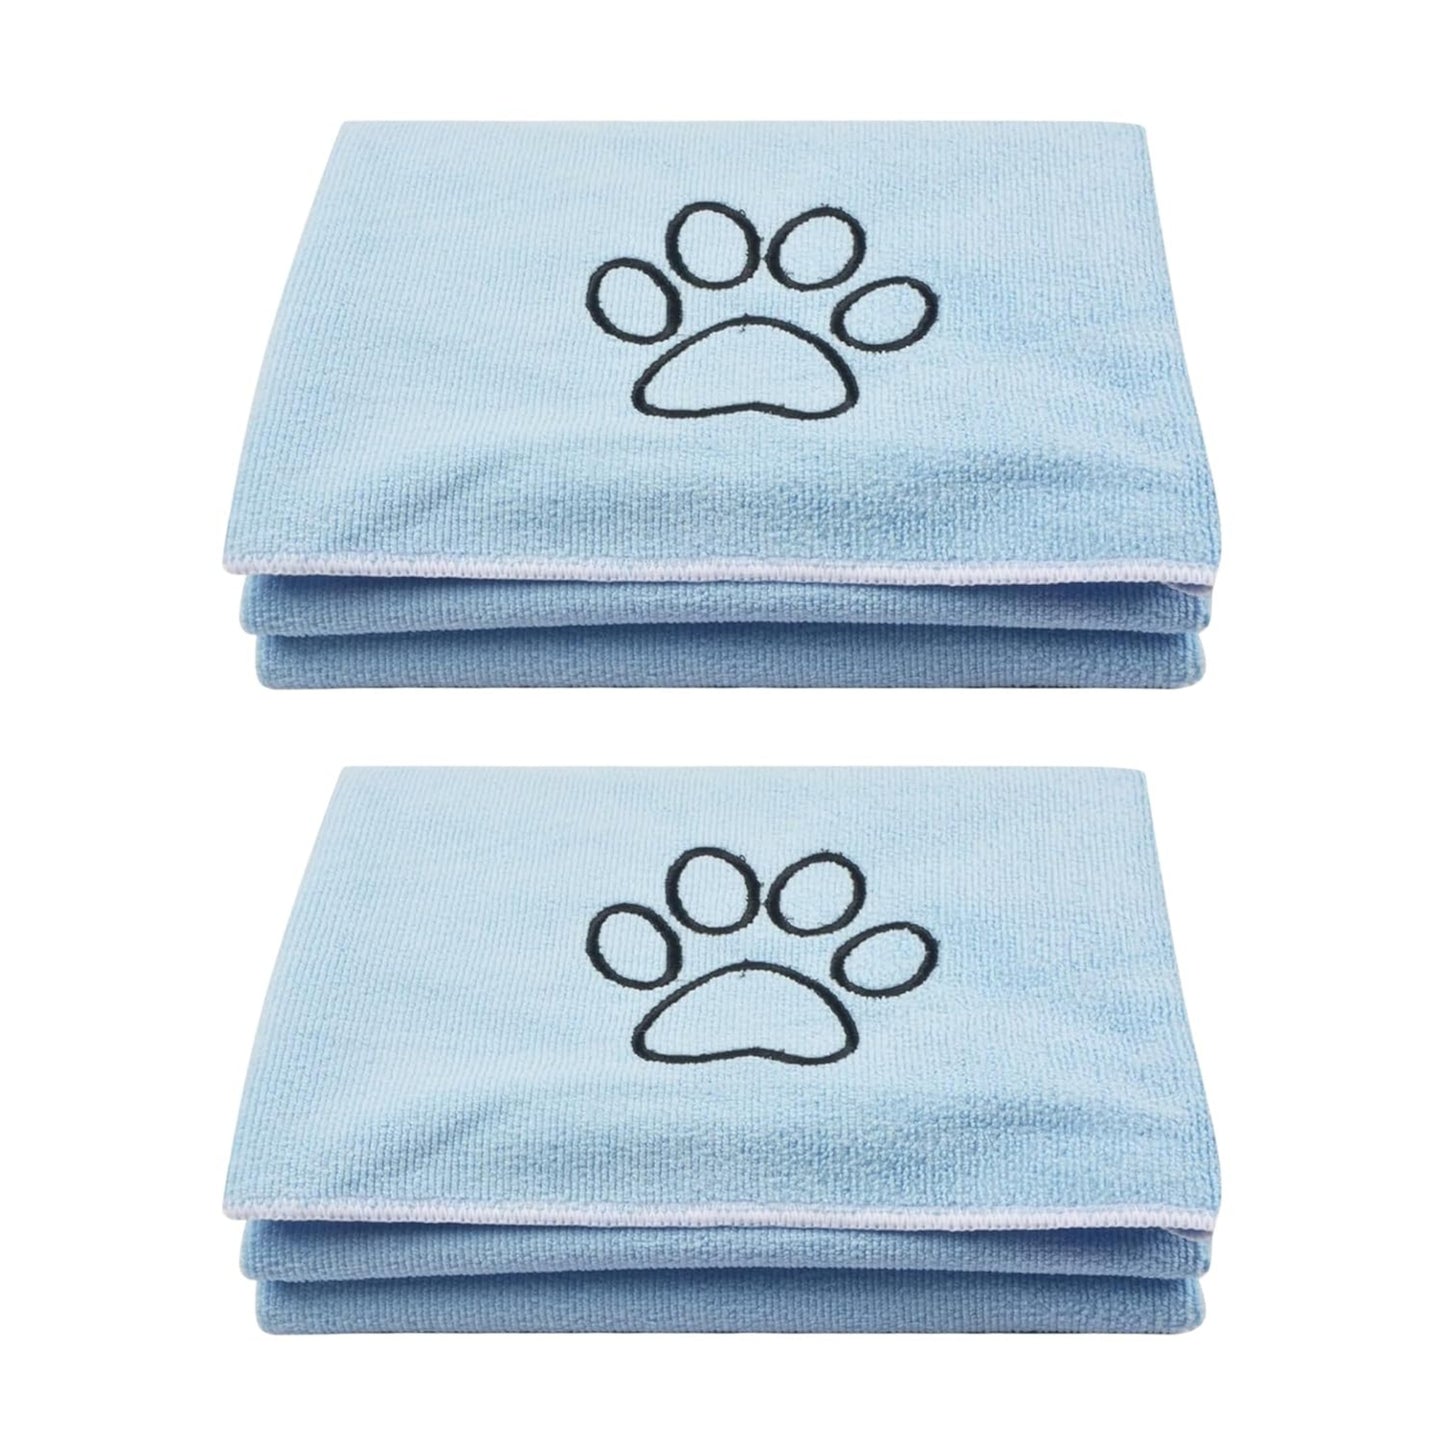 Foodie Puppies Dog Bathing Quick Drying Towel (60x115cm), Pack of 2